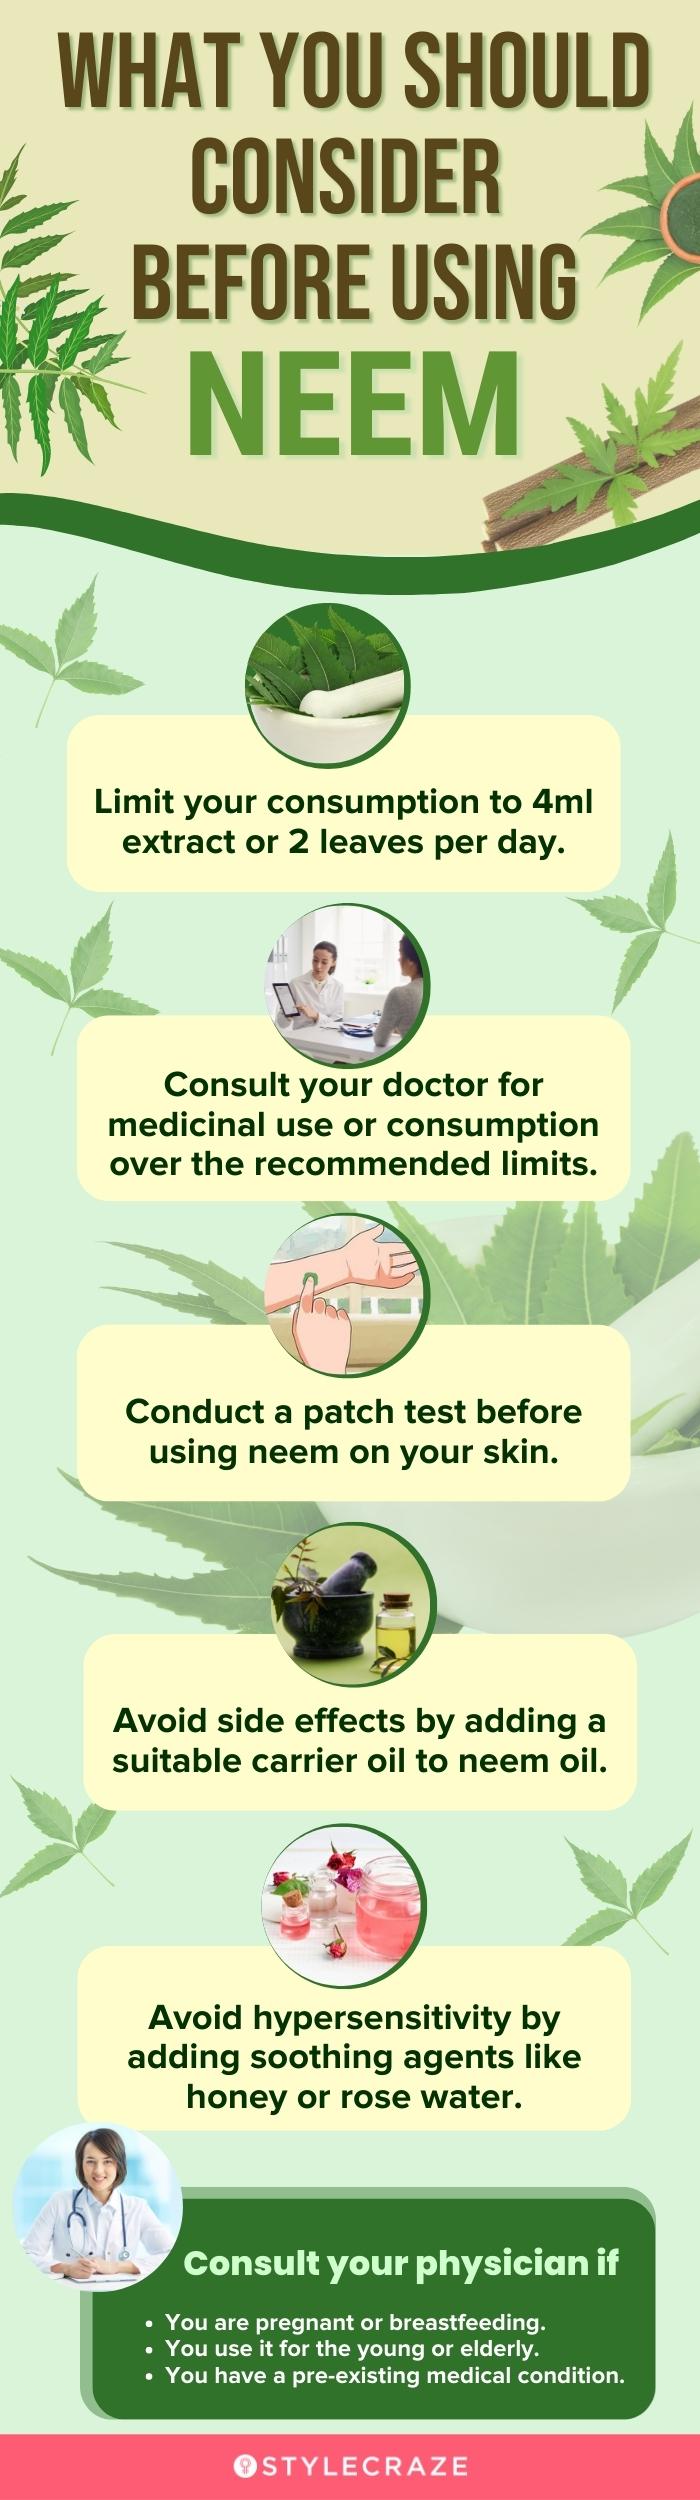 what you should consider before using neem [infographic]